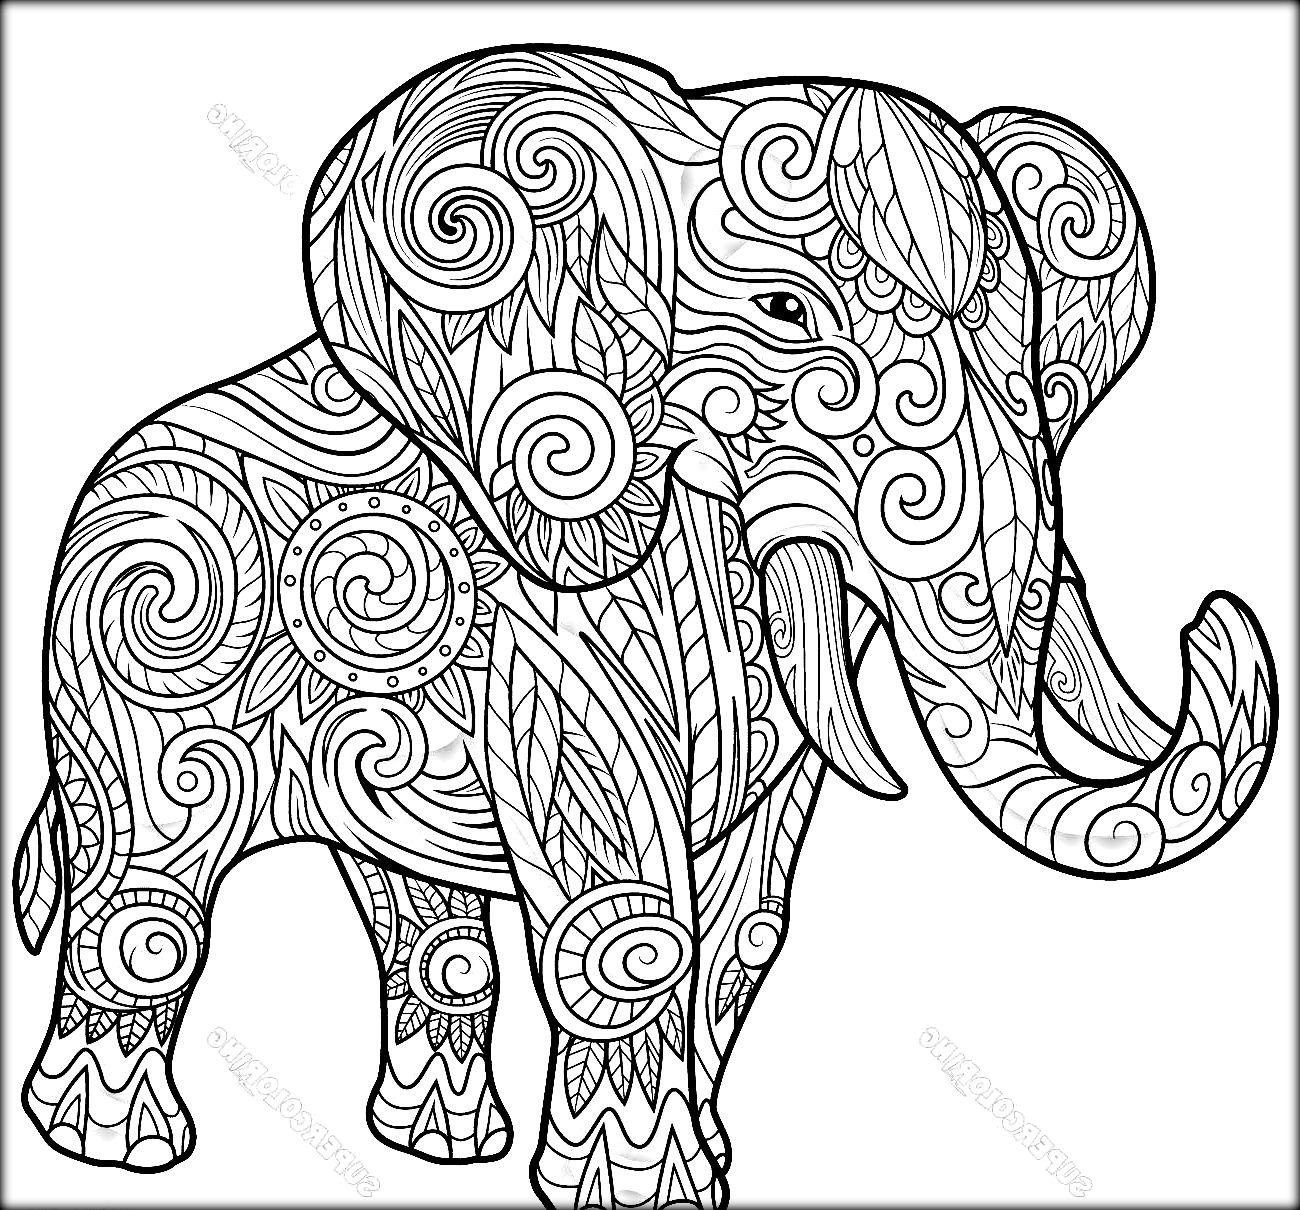 Adult Coloring Book Elephant
 Elephant Coloring Pages coloringsuite